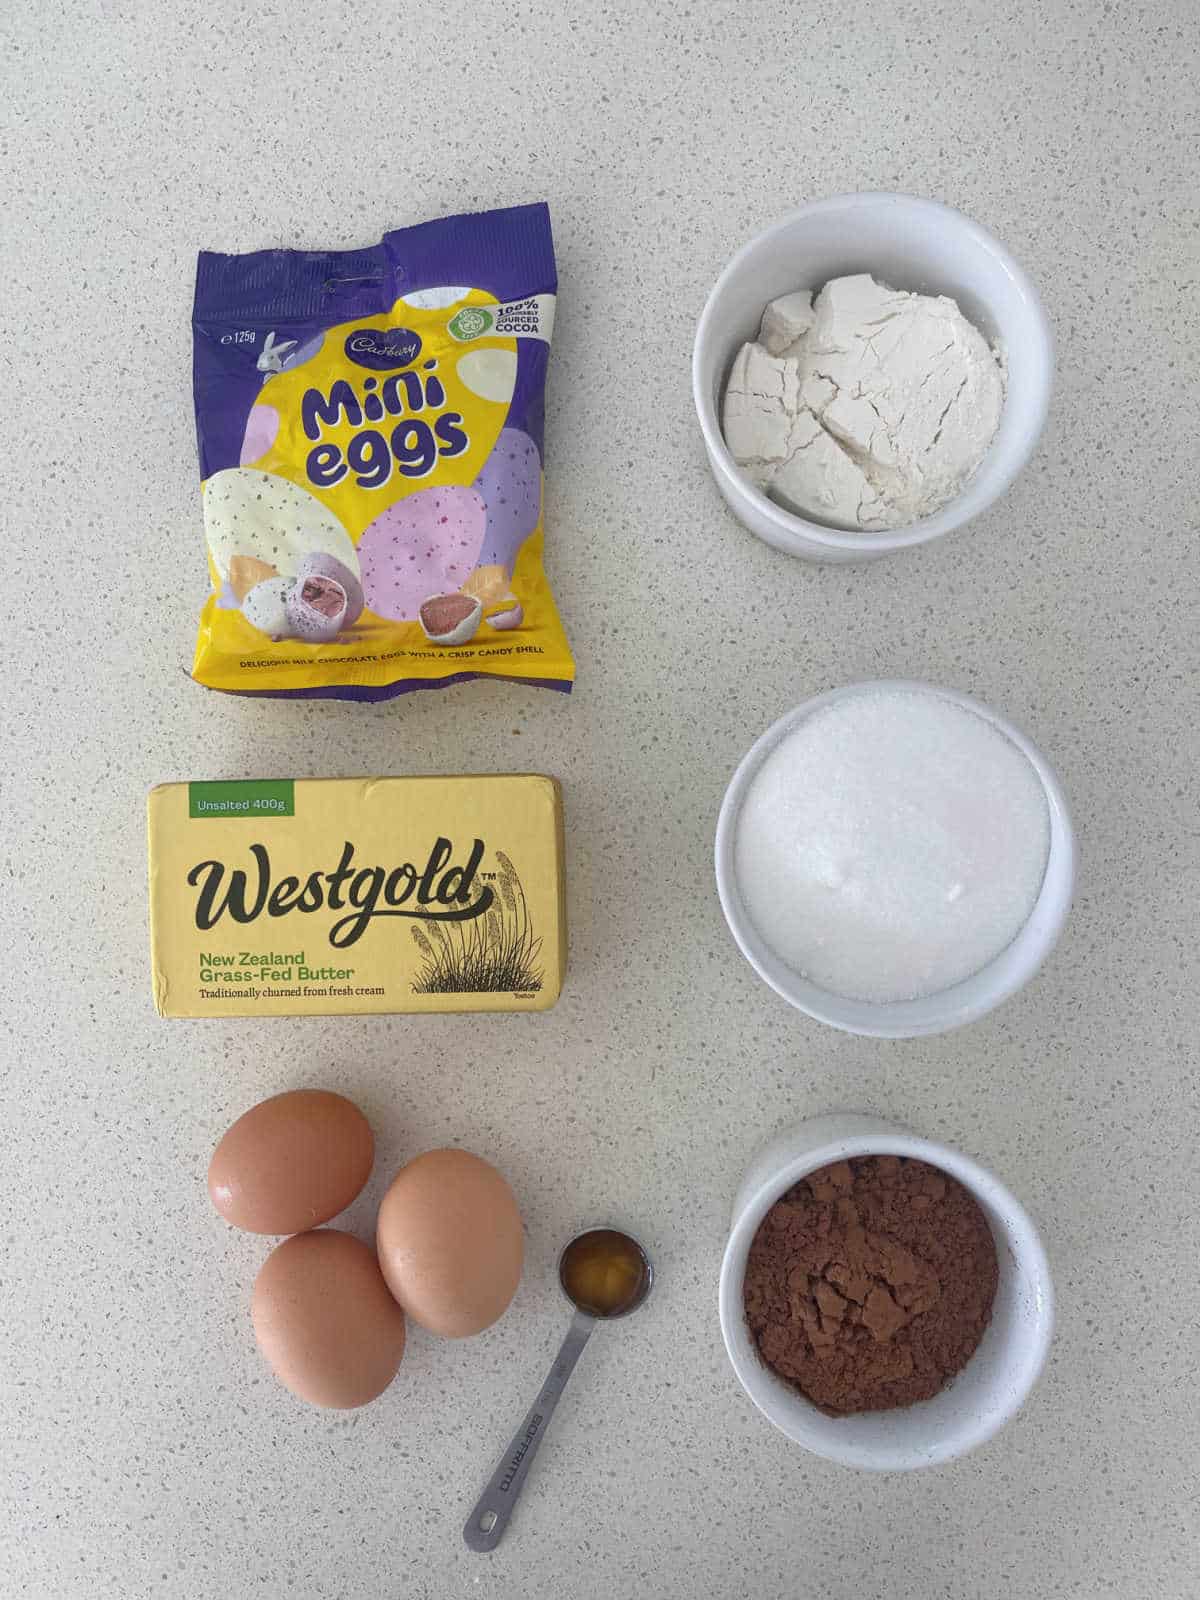 Thermomix Easter egg Brownie Ingredients.